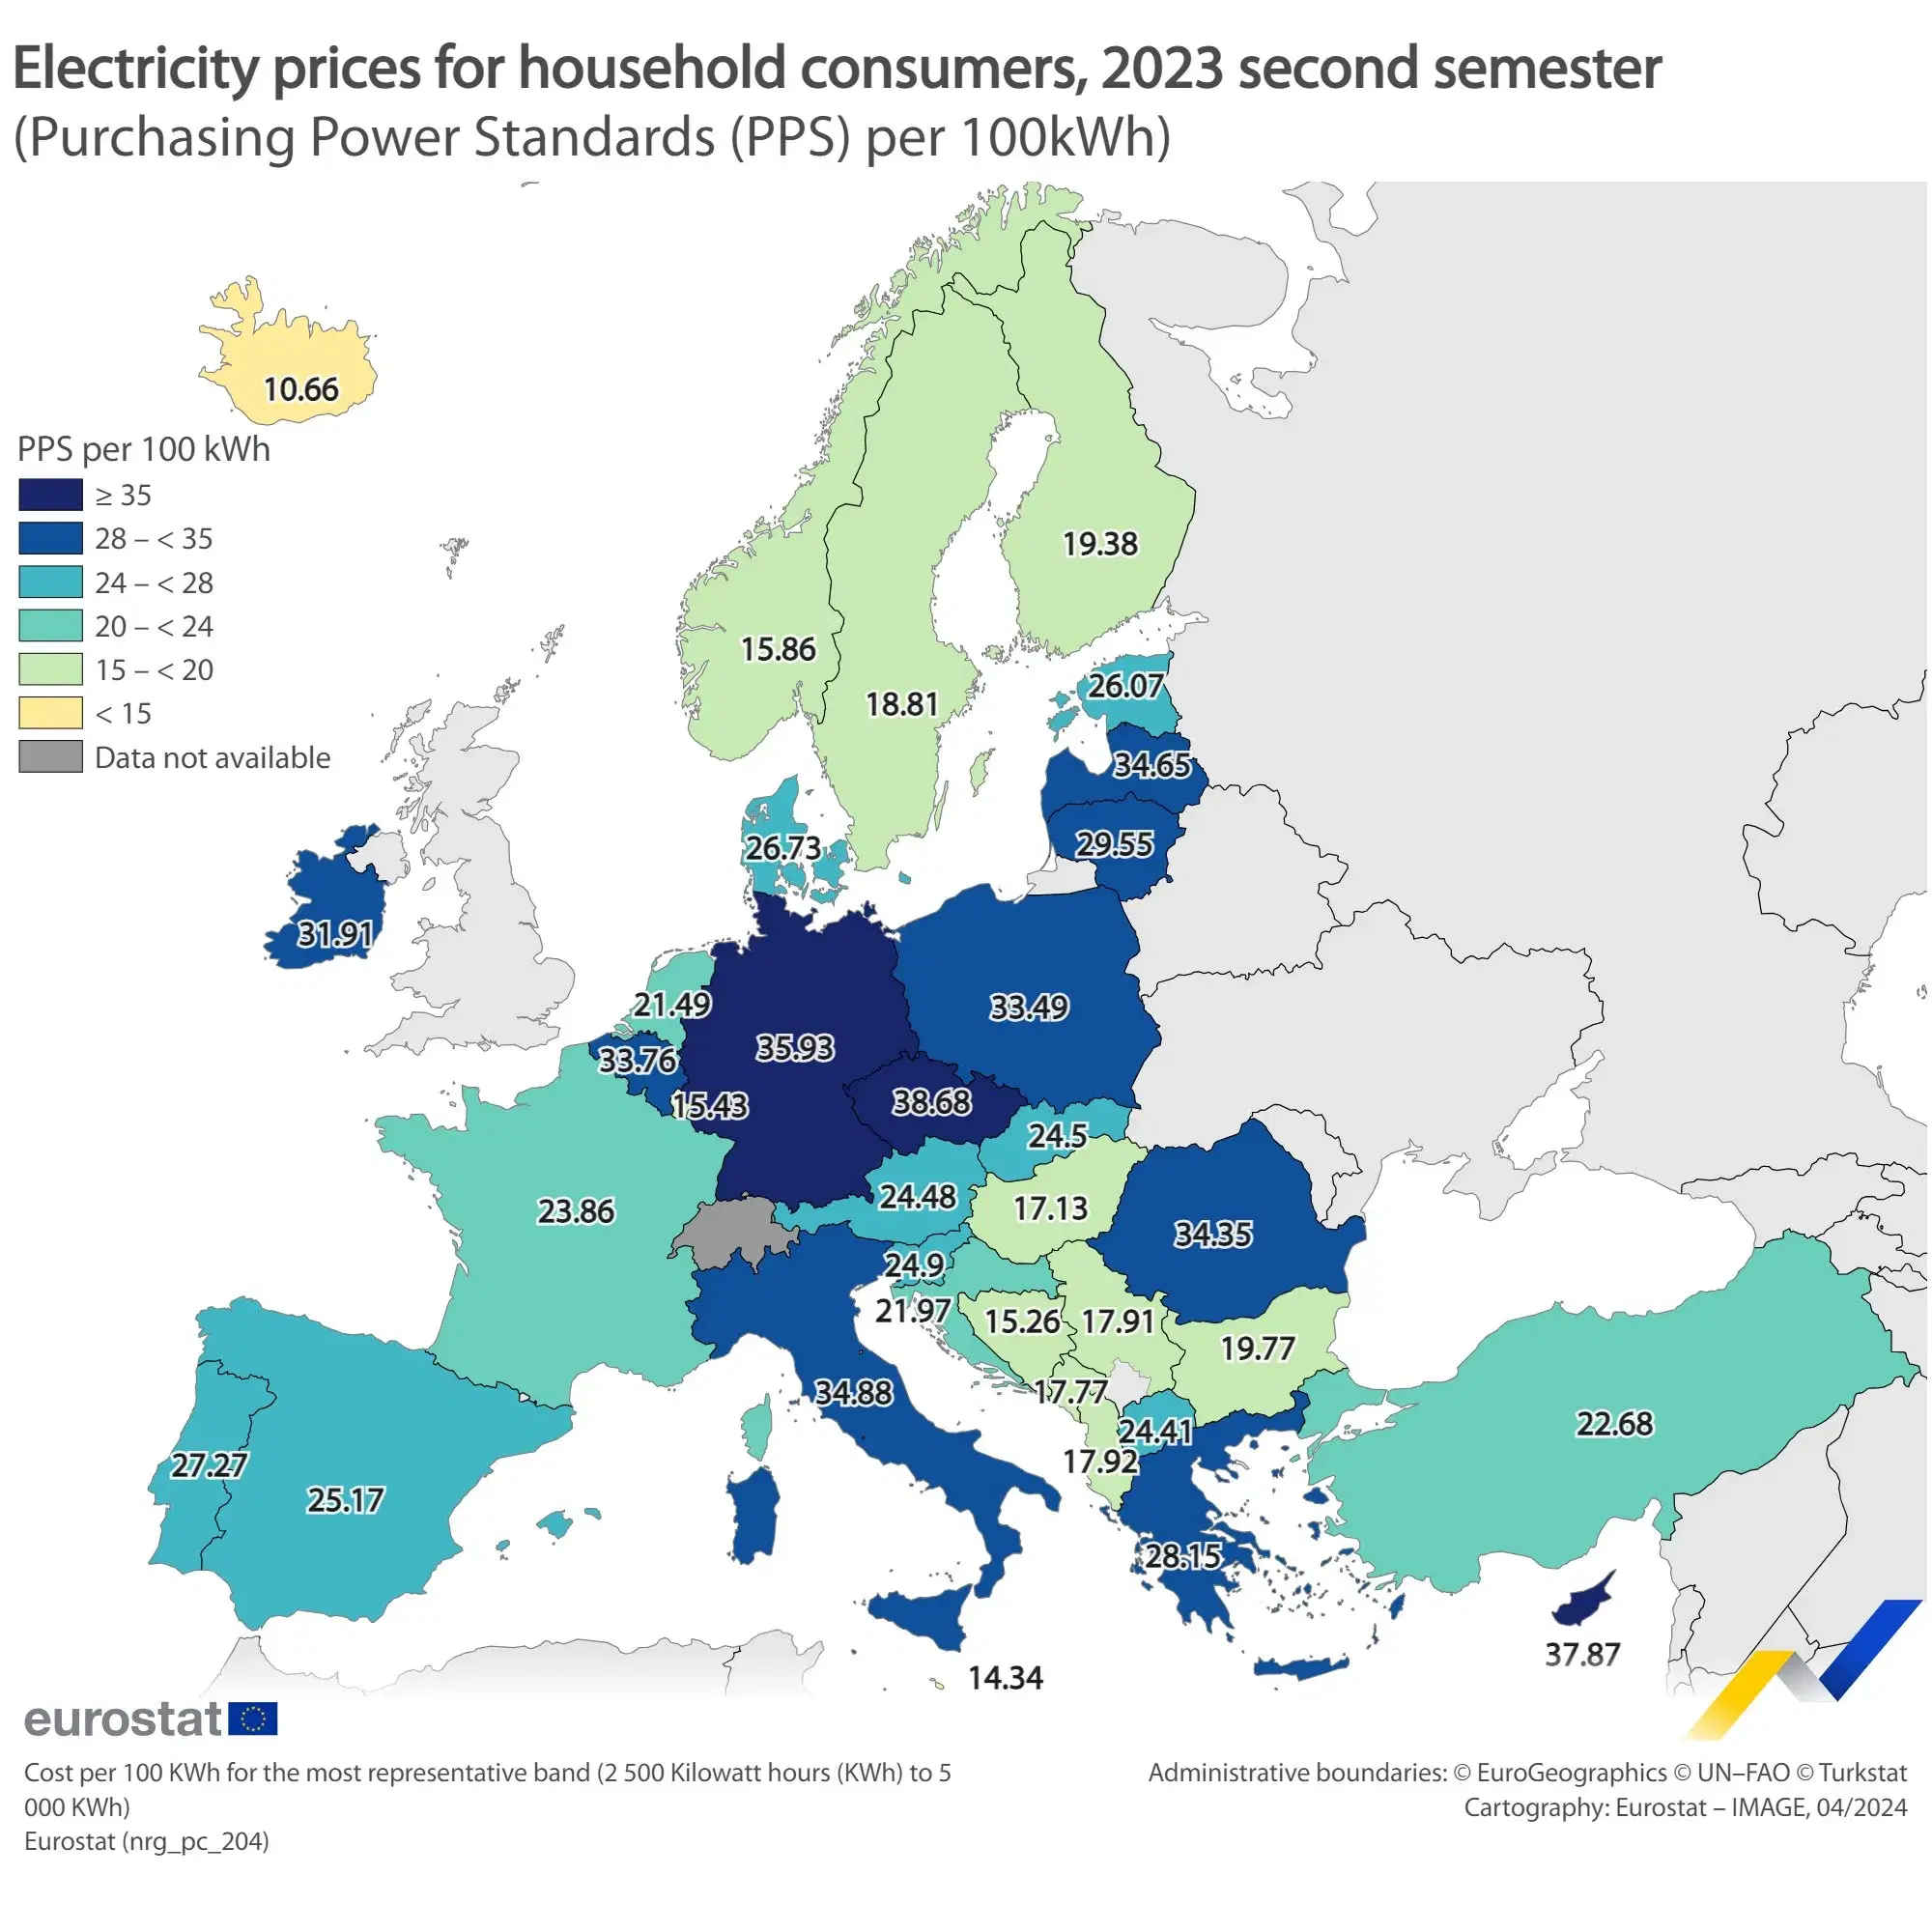 Comparing Electricity Prices for Household Consumers in Europe